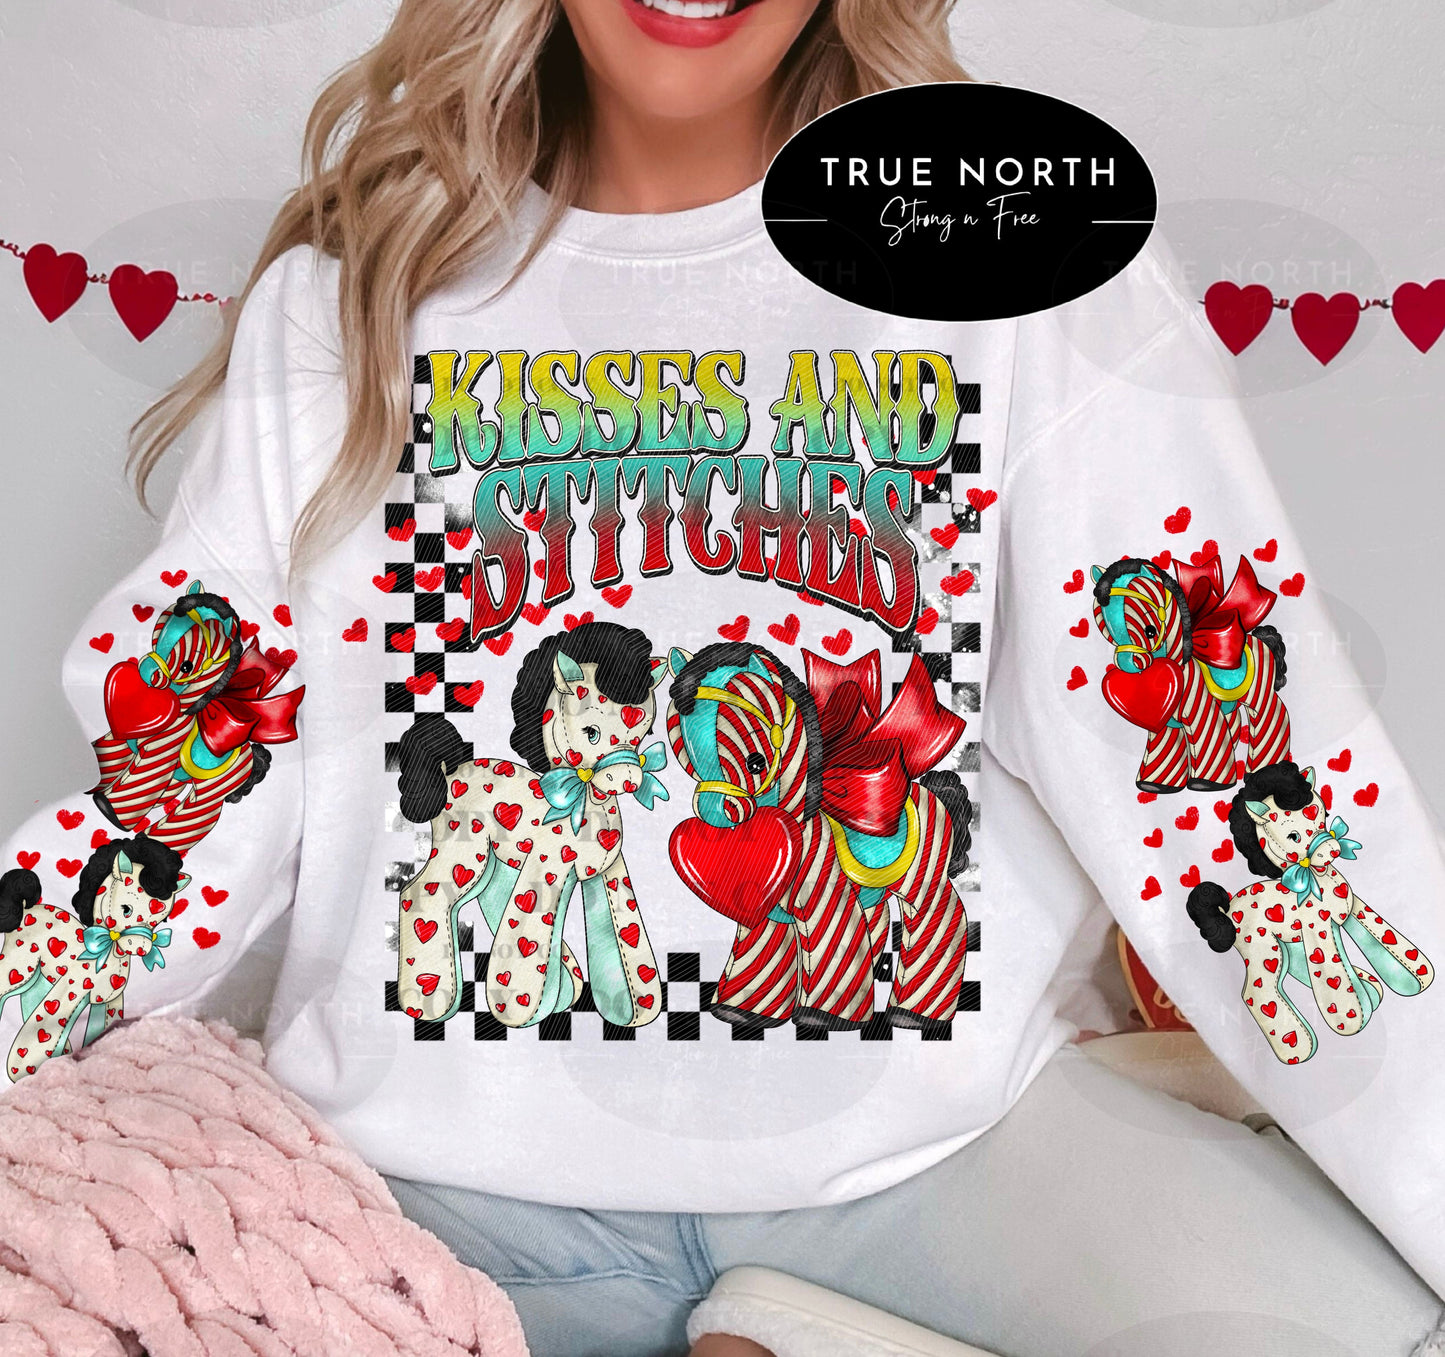 a woman wearing a white shirt with clowns on it